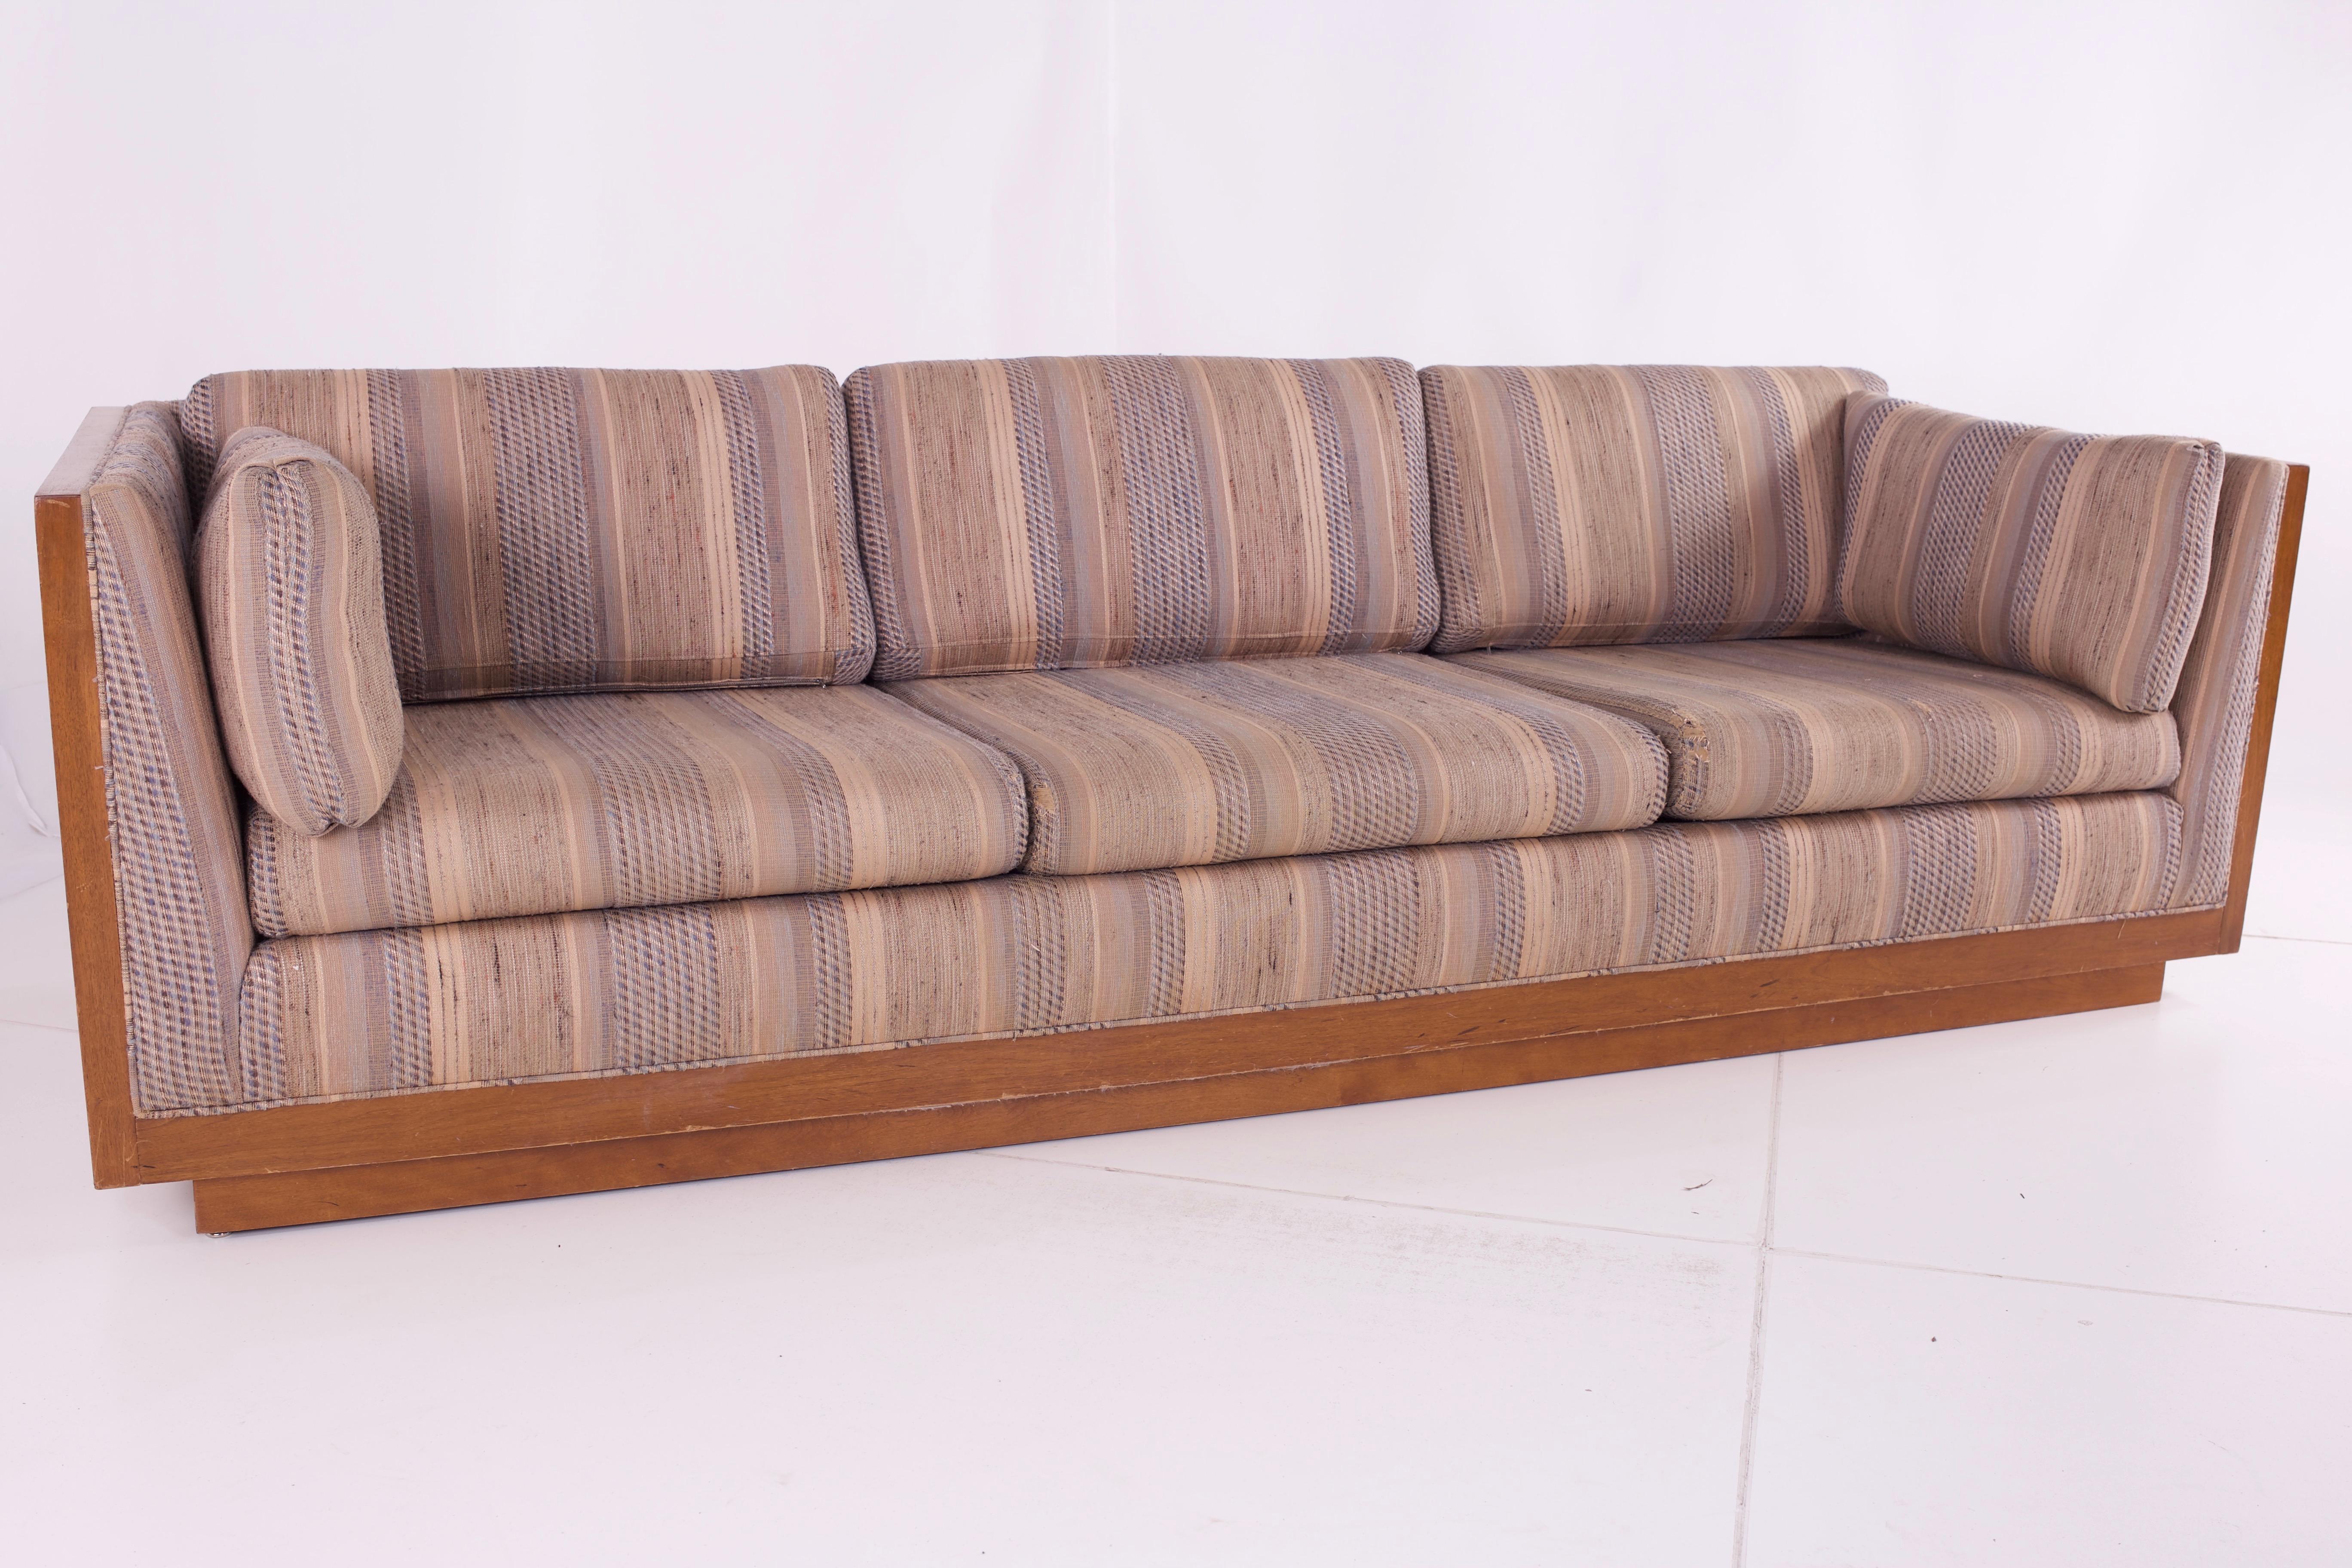 Milo Baughman style Mid Century walnut floating case sofa 

Measures: 94 wide x 35 deep x 26.25 high 

This price includes getting this piece in what we call restored vintage condition. That means the piece is permanently fixed upon purchase so it’s